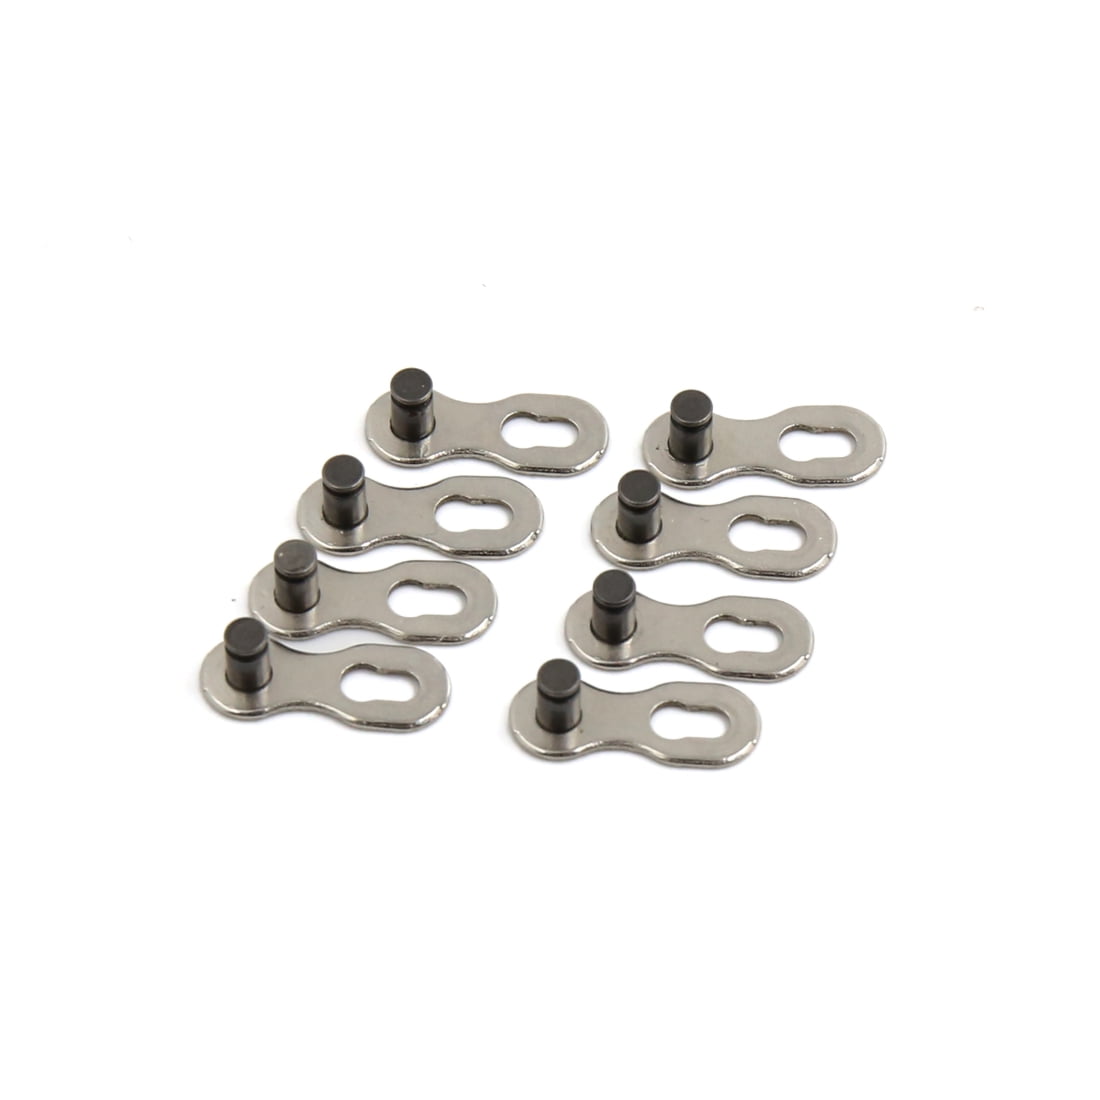 5 Pairs S 6-10 Speed Chain Link Anti-Rust MTB/Road Connector Chain 1/2 x 3/32 Inches 